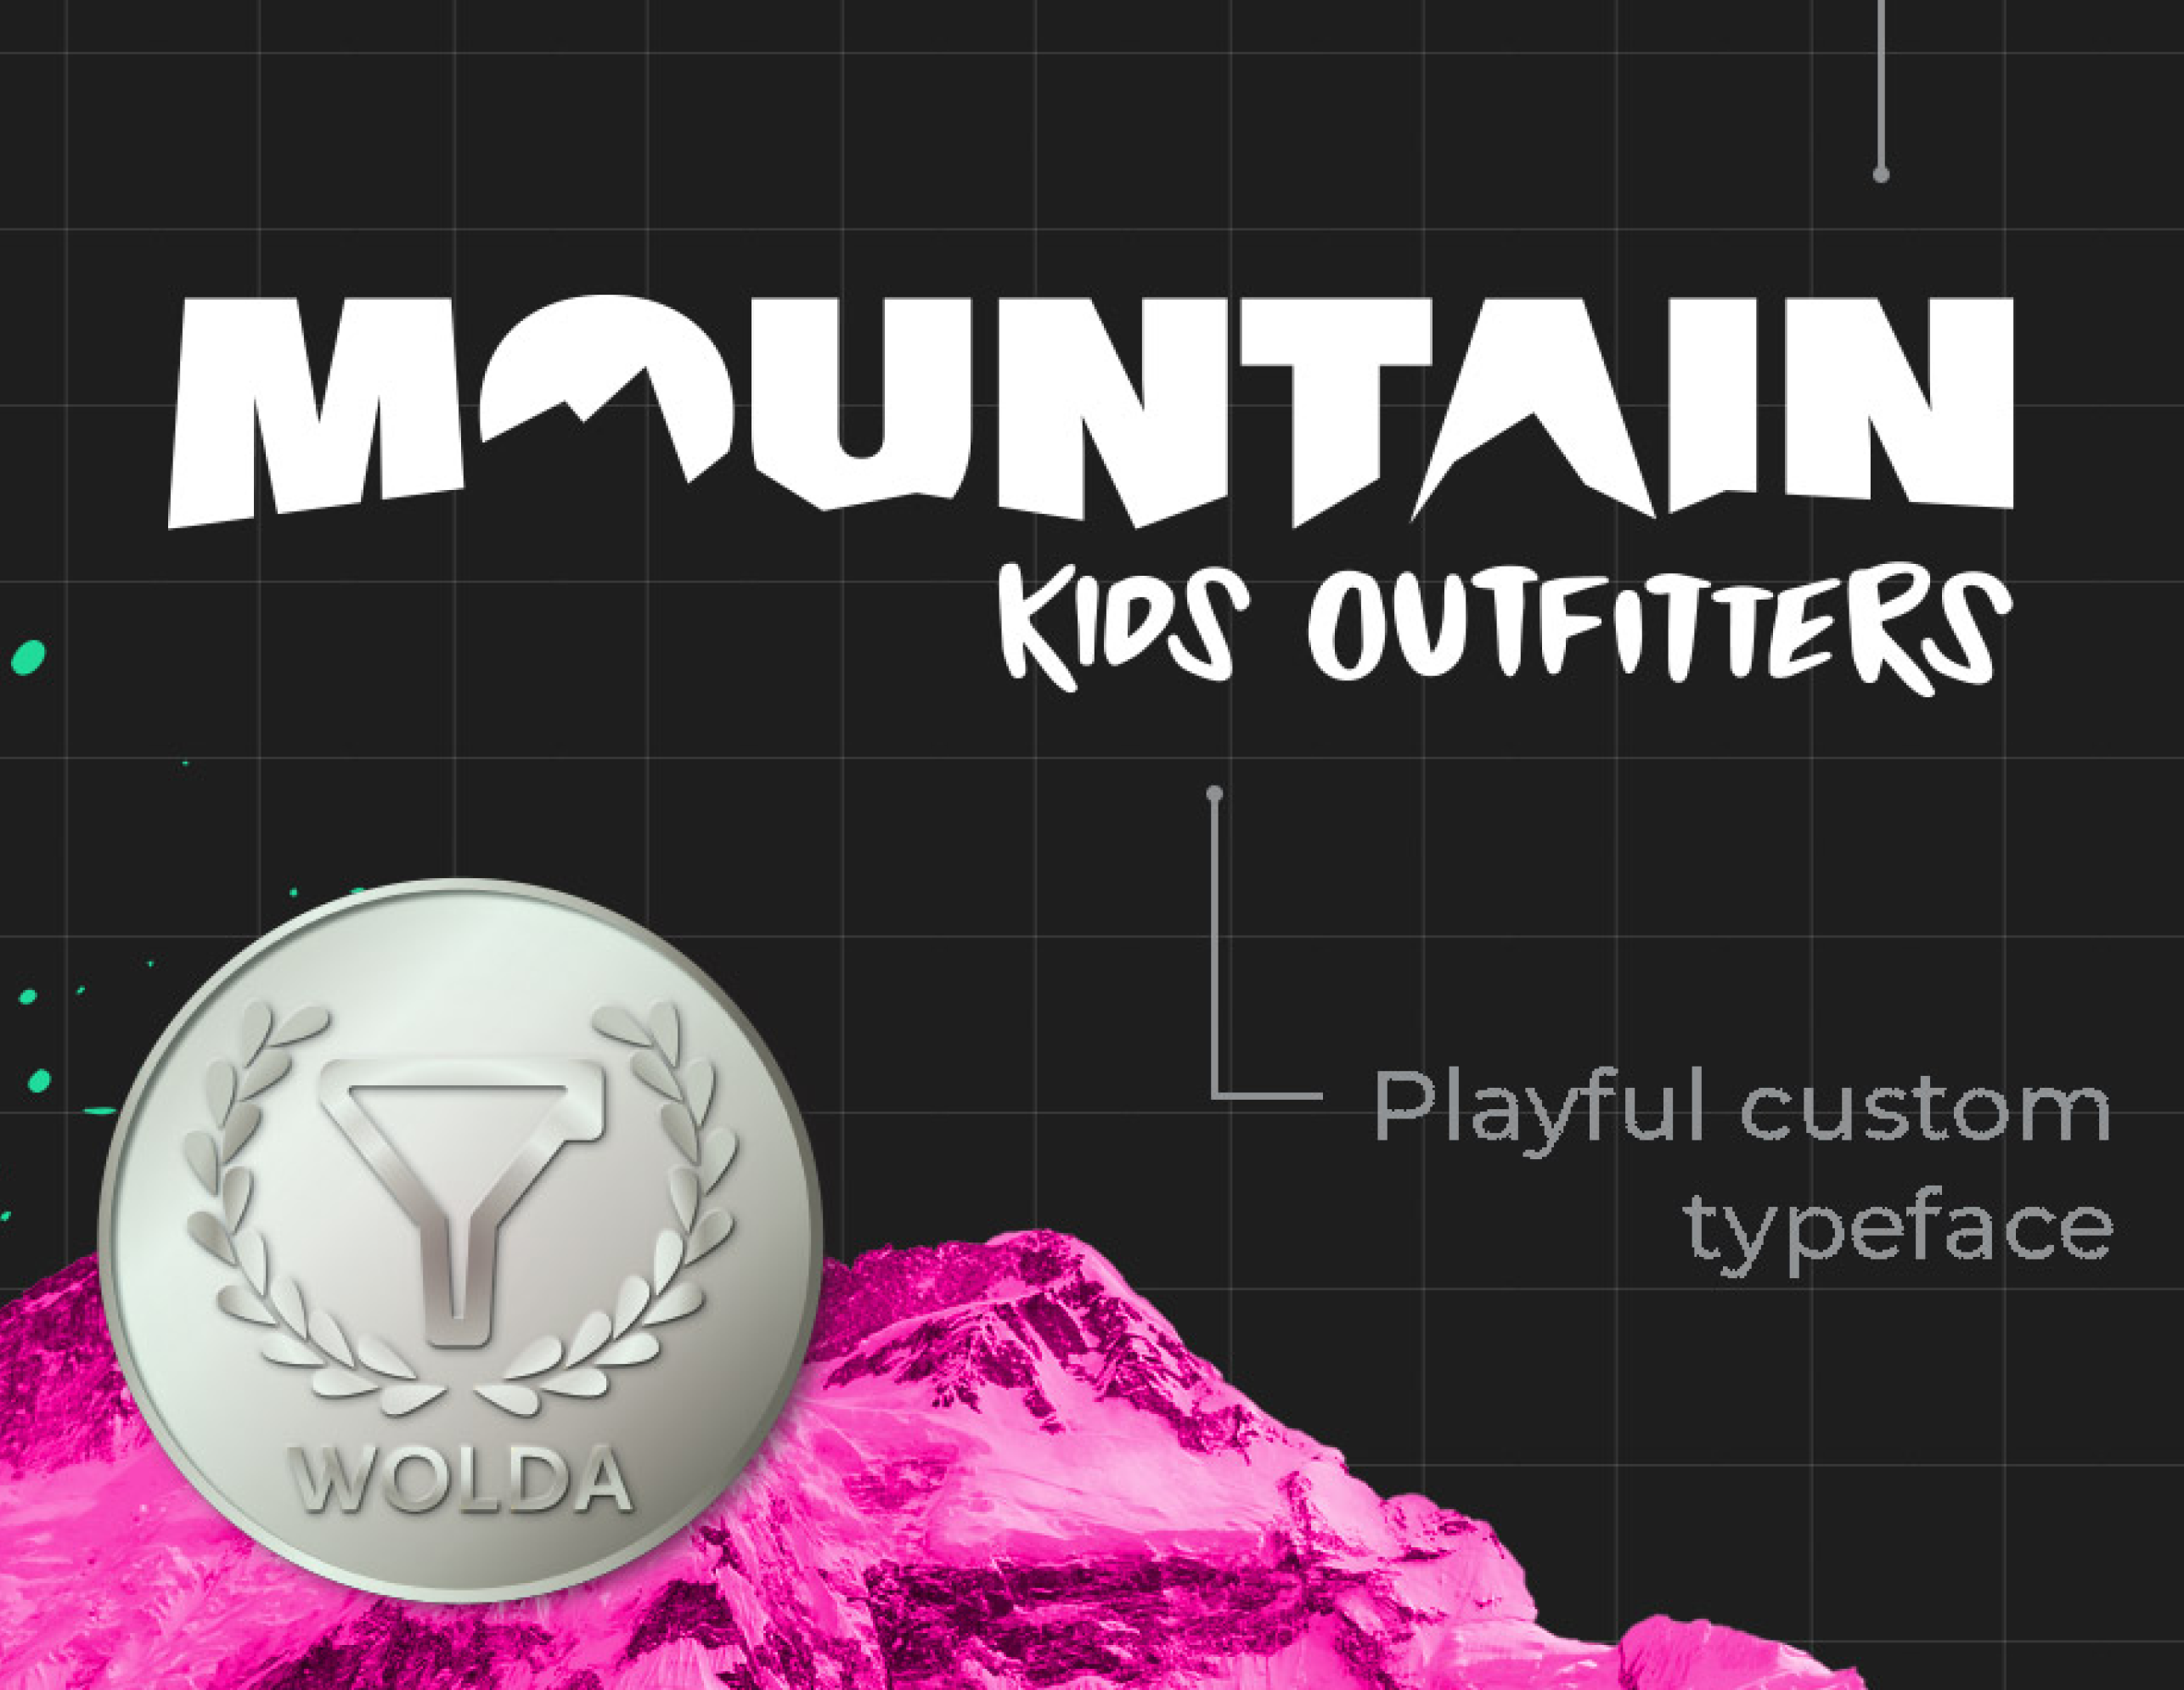 WOLDA award-winning design created by Beacon creative agency for Mountain Kids Outfitters